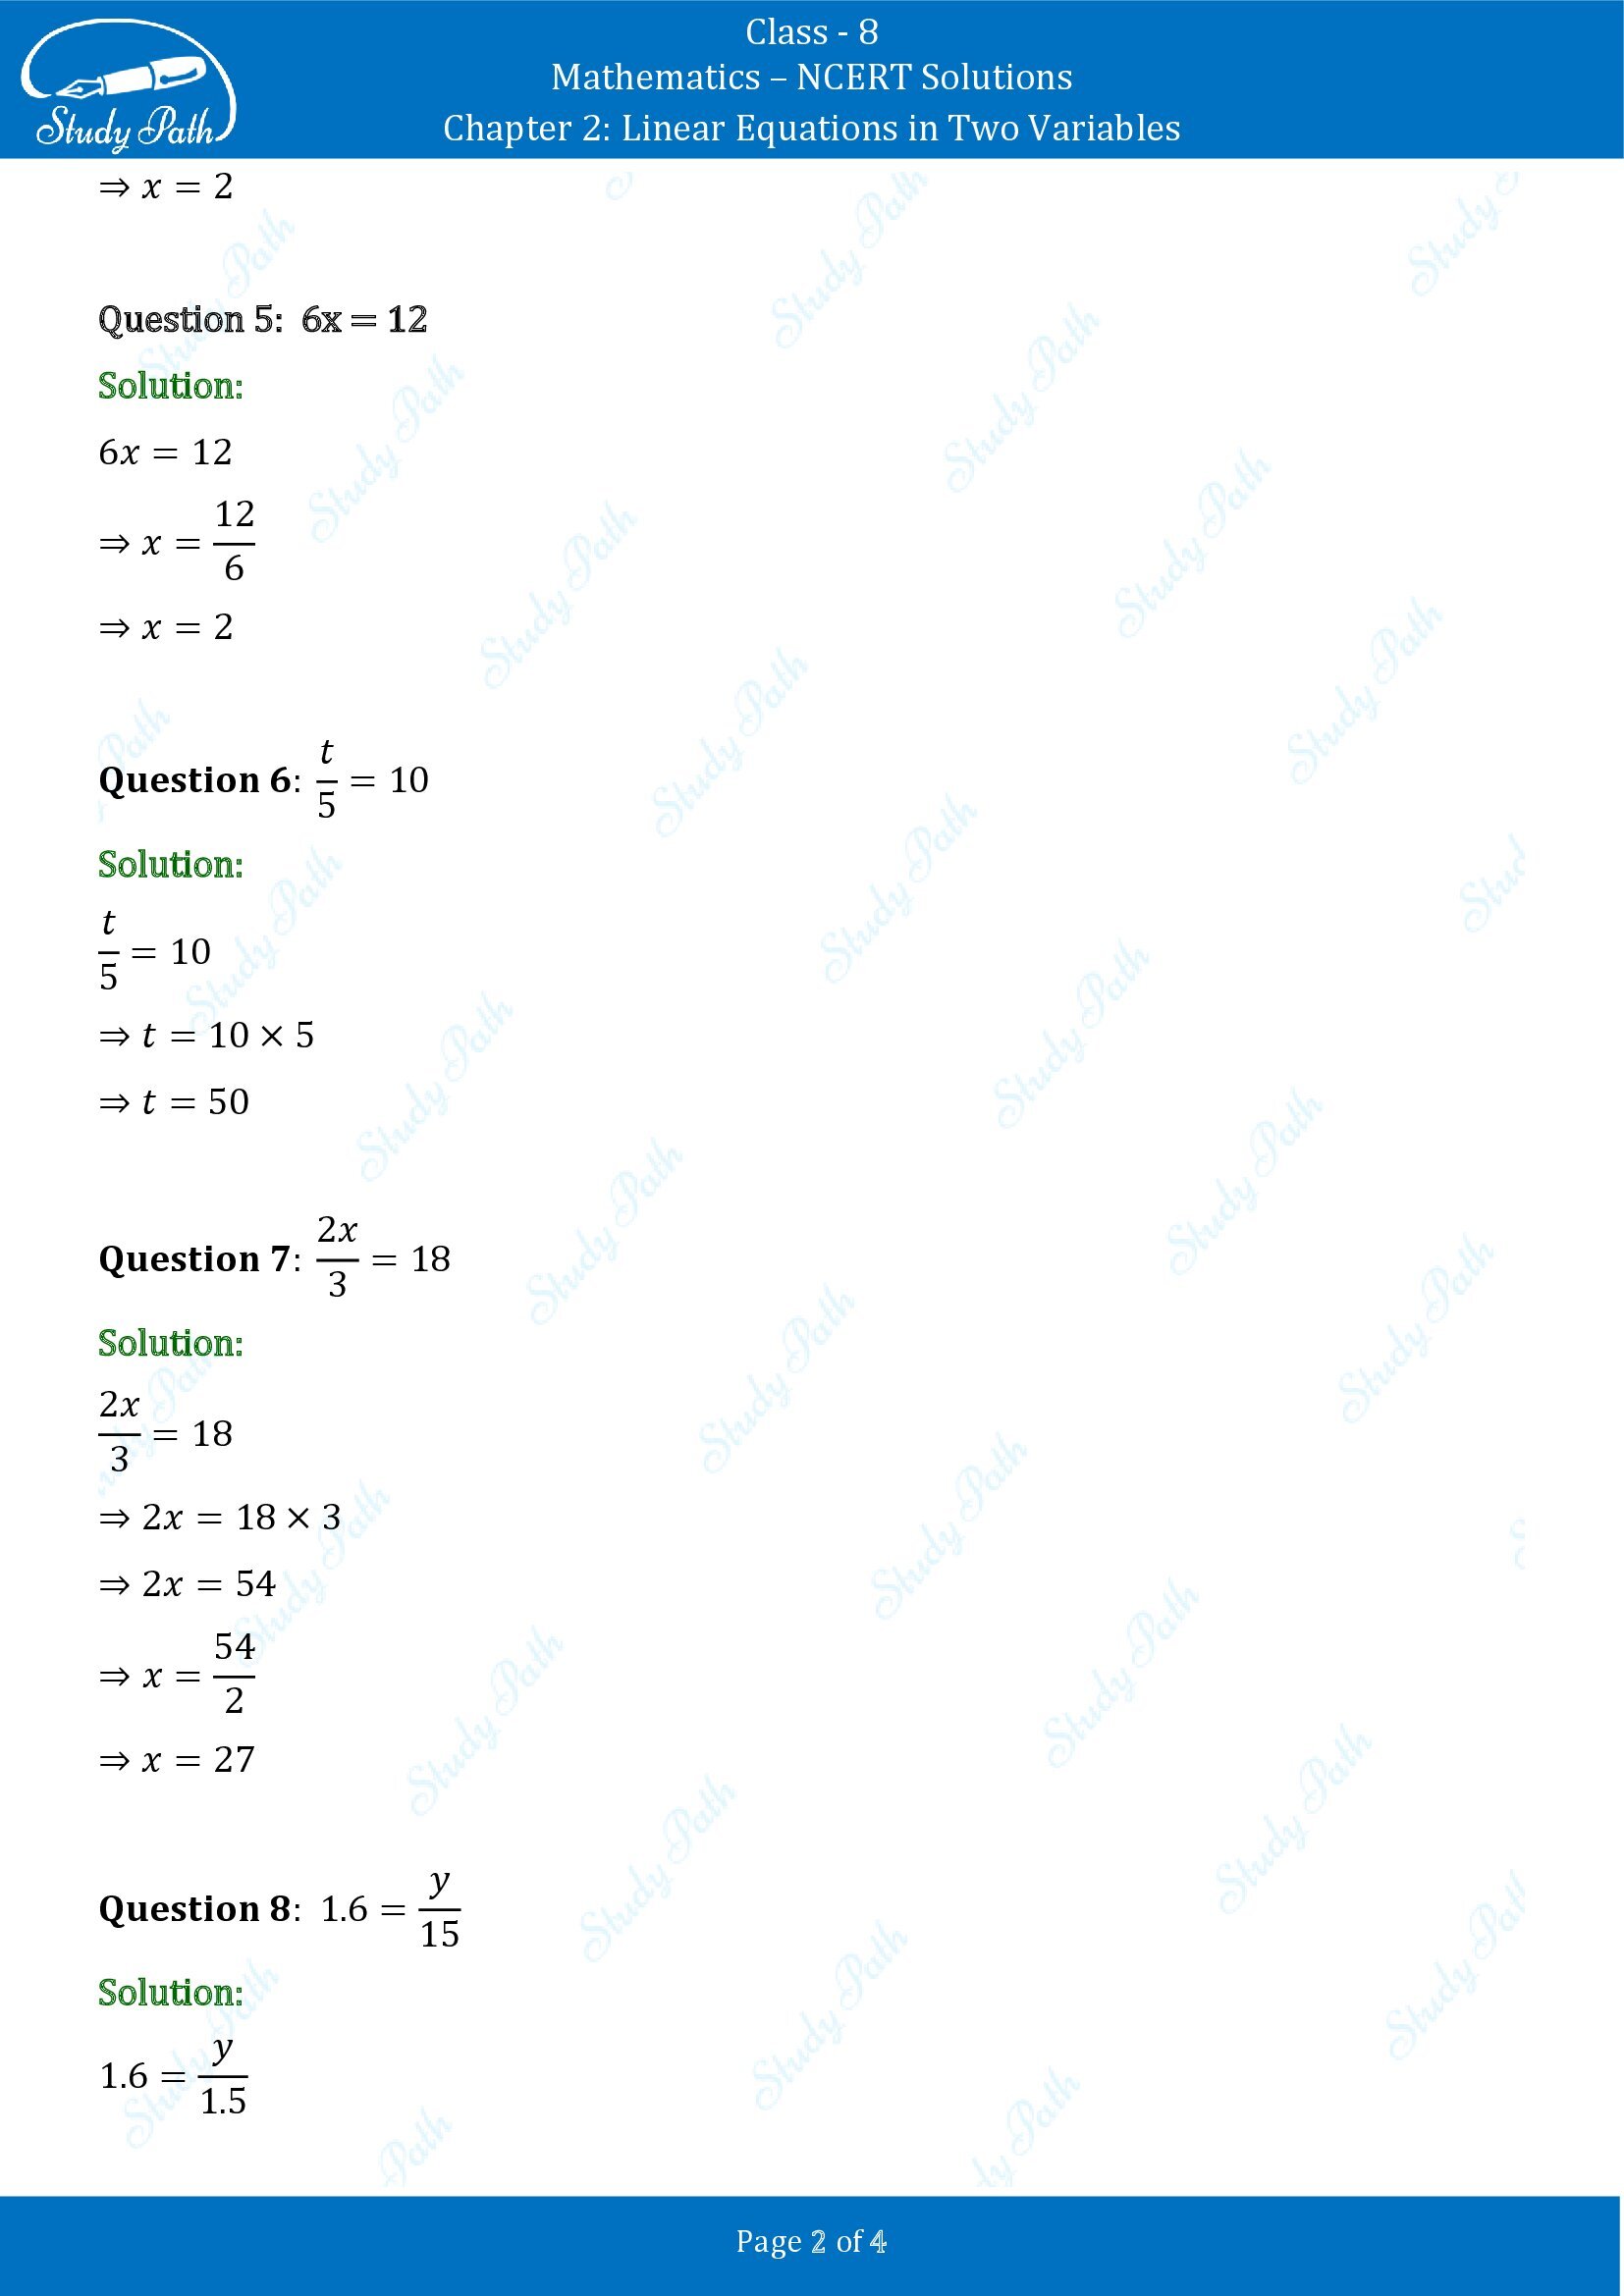 NCERT Solutions for Class 8 Maths Chapter 2 Linear Equations in Two Variables Exercise 2.1 00002